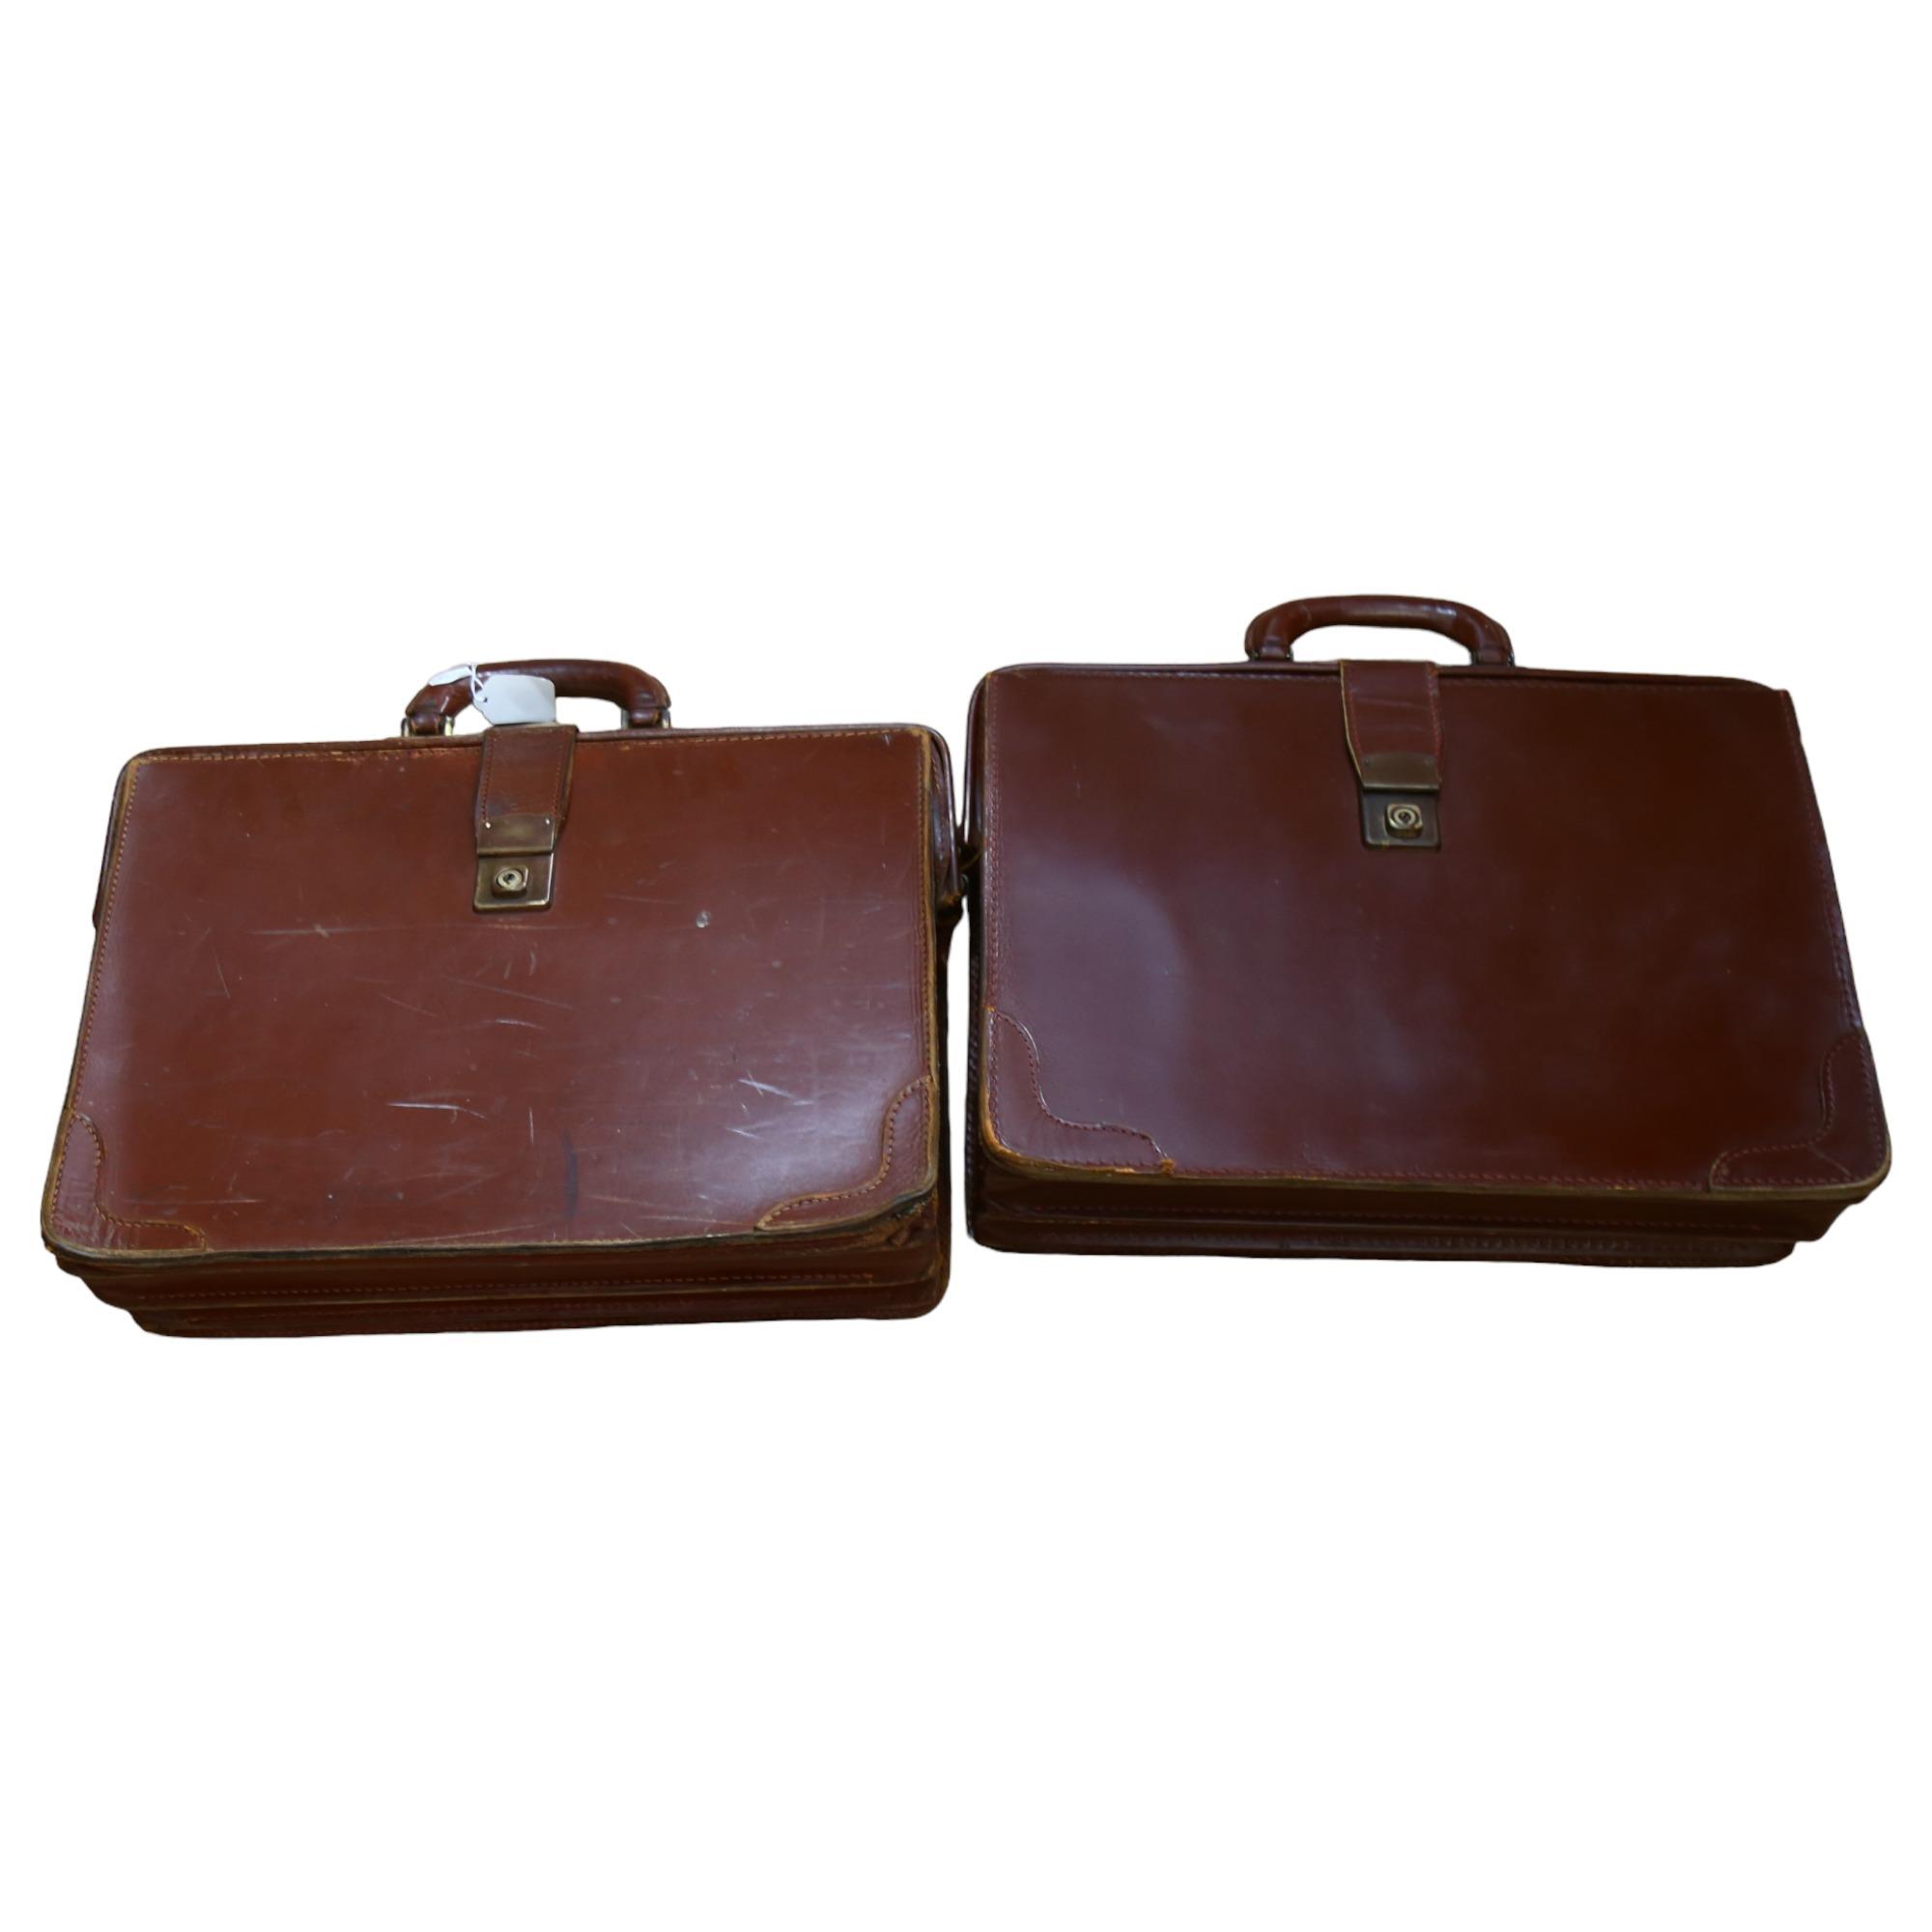 2 Vintage leather briefcases, 1 with printed script for a Pendragon product